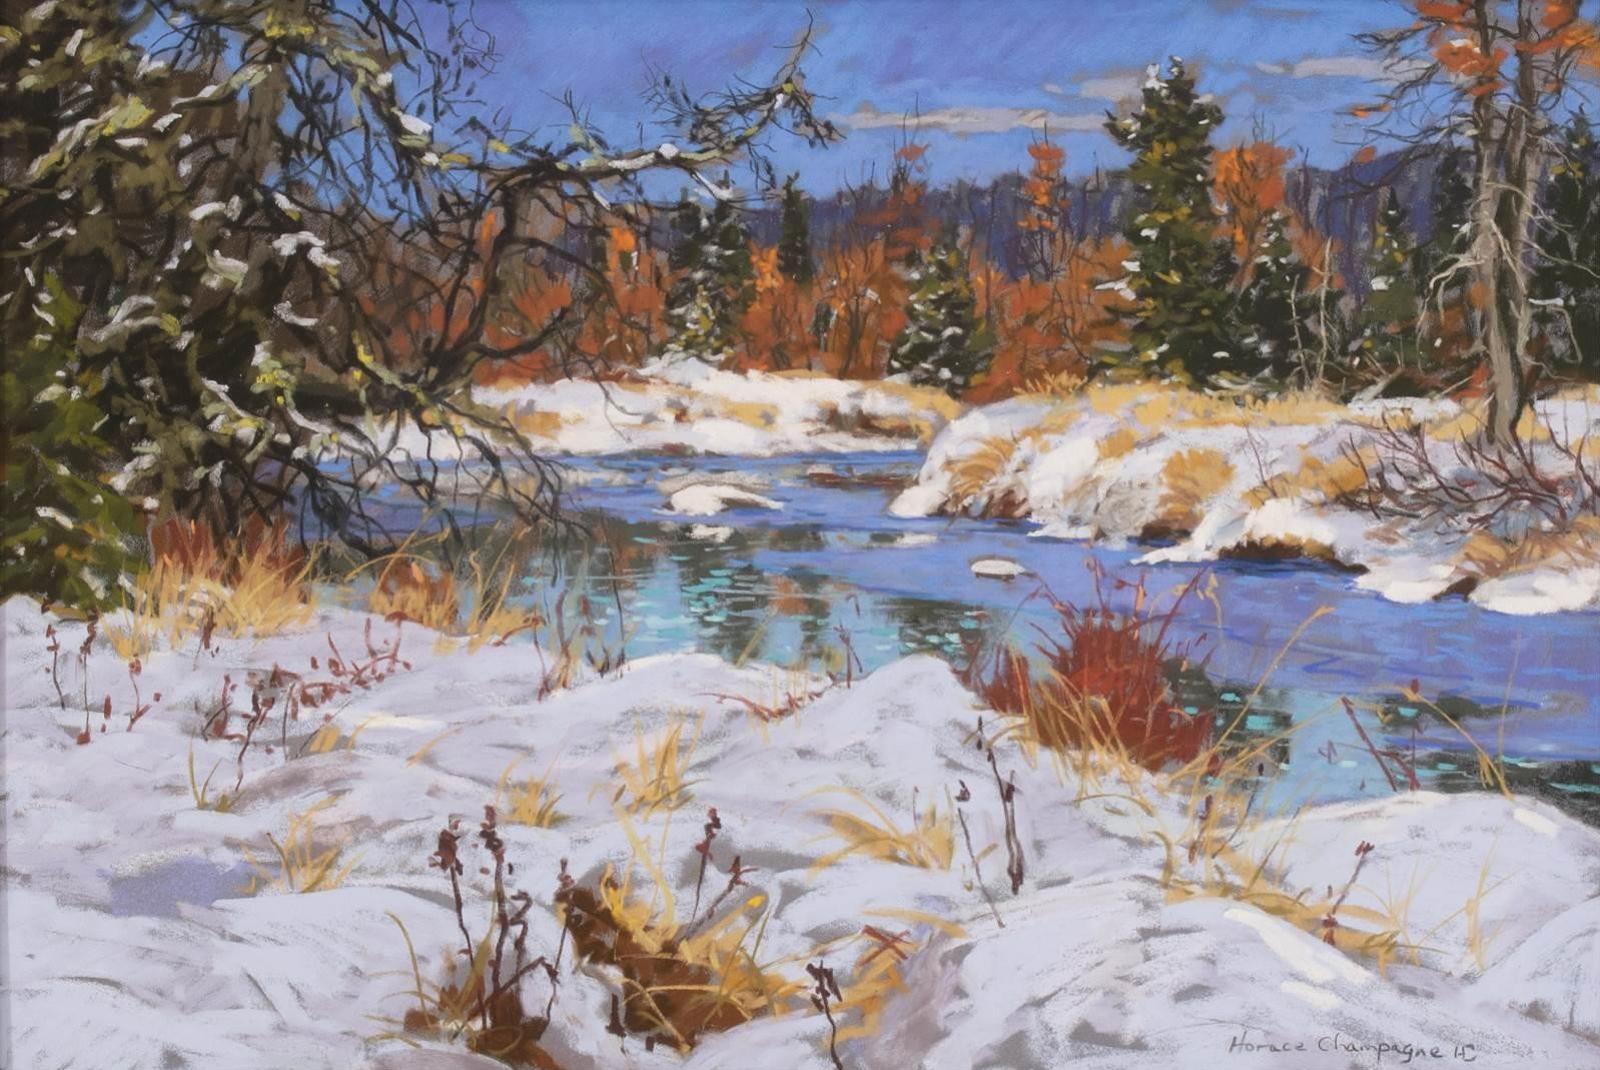 Horace Champagne (1937) - Early Snow In Parc Des Laurentides (The Montmorency River In October, Quebec); 2010